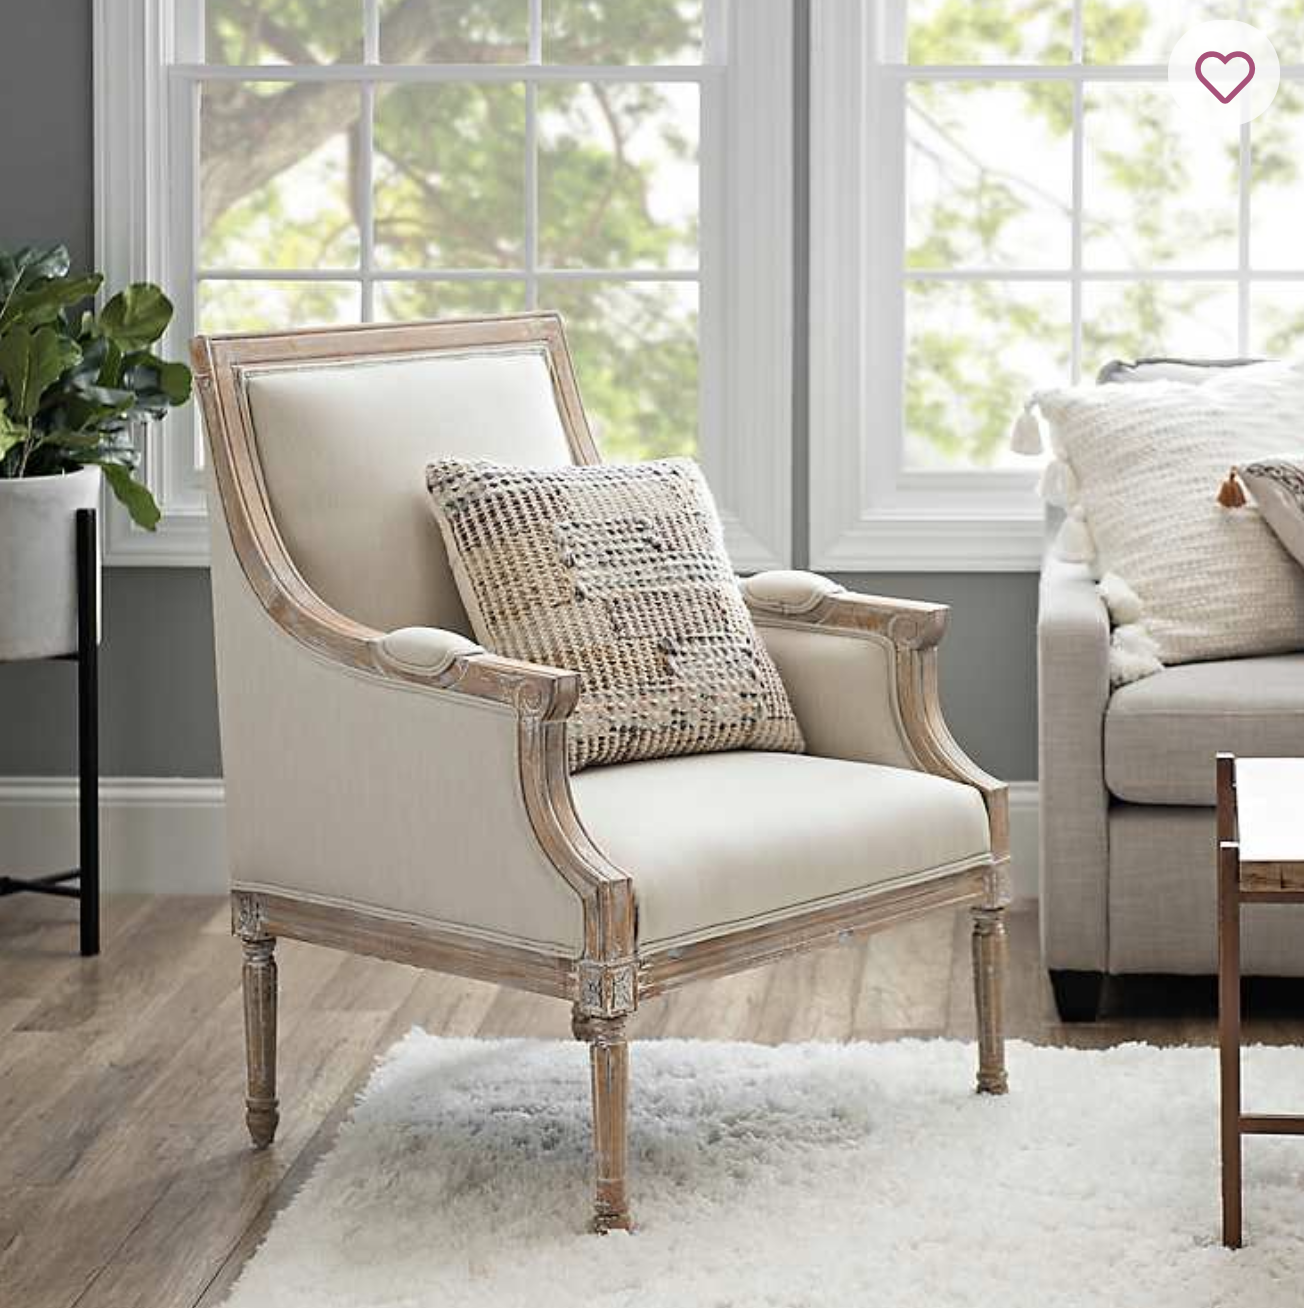 Accent chair. +110 Unique Living Room Furniture Pieces That Amaze Everyone - 40